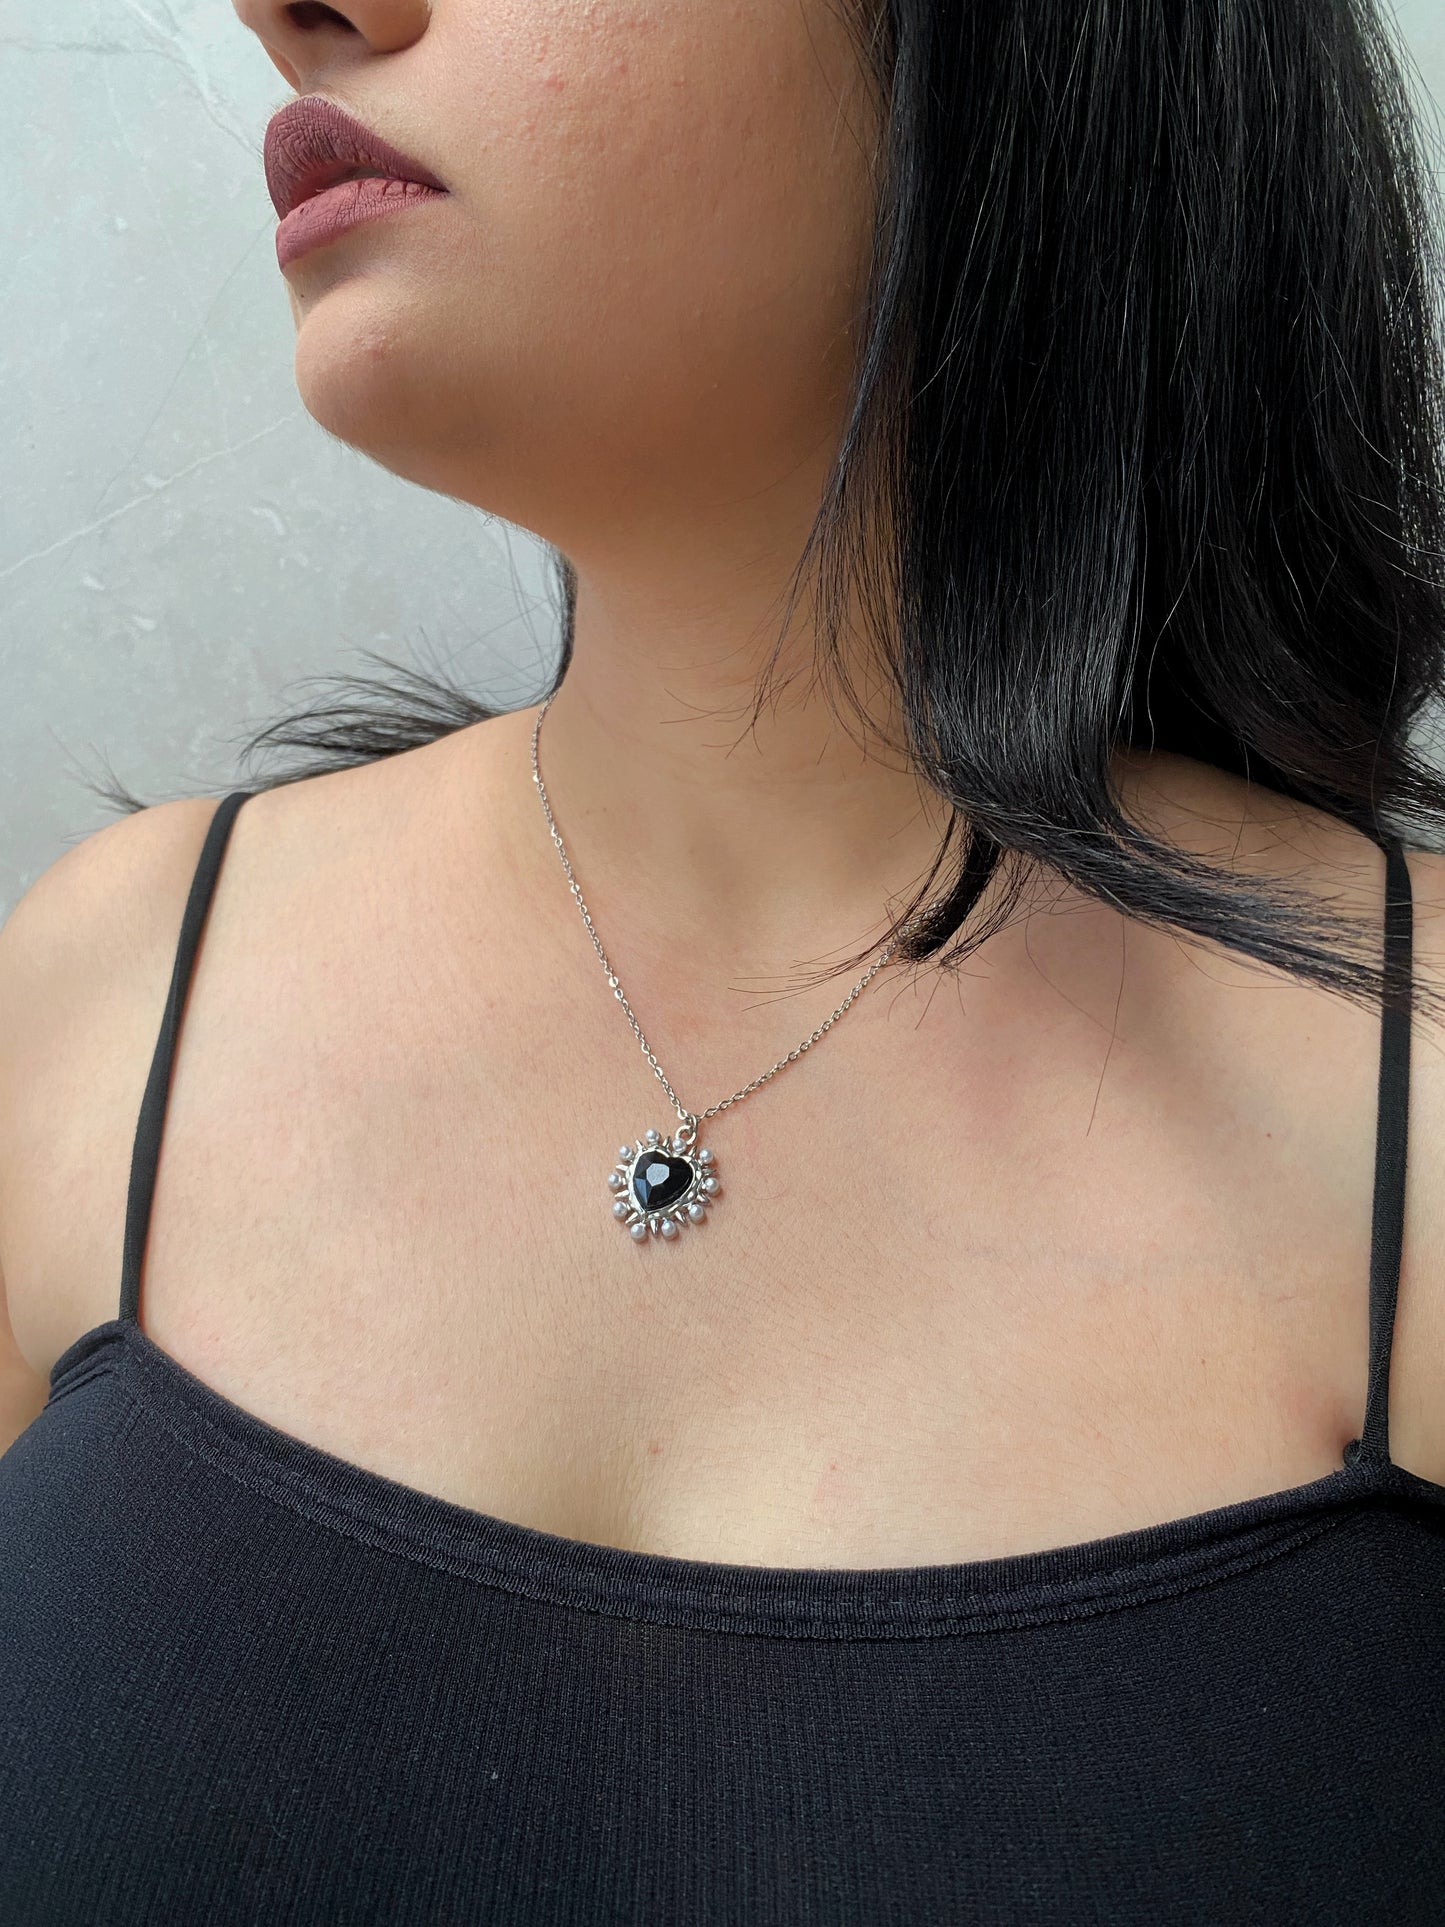 PEARLY BLACK CRYSTAL HEART NECKLACE WITH SILVER CHAIN